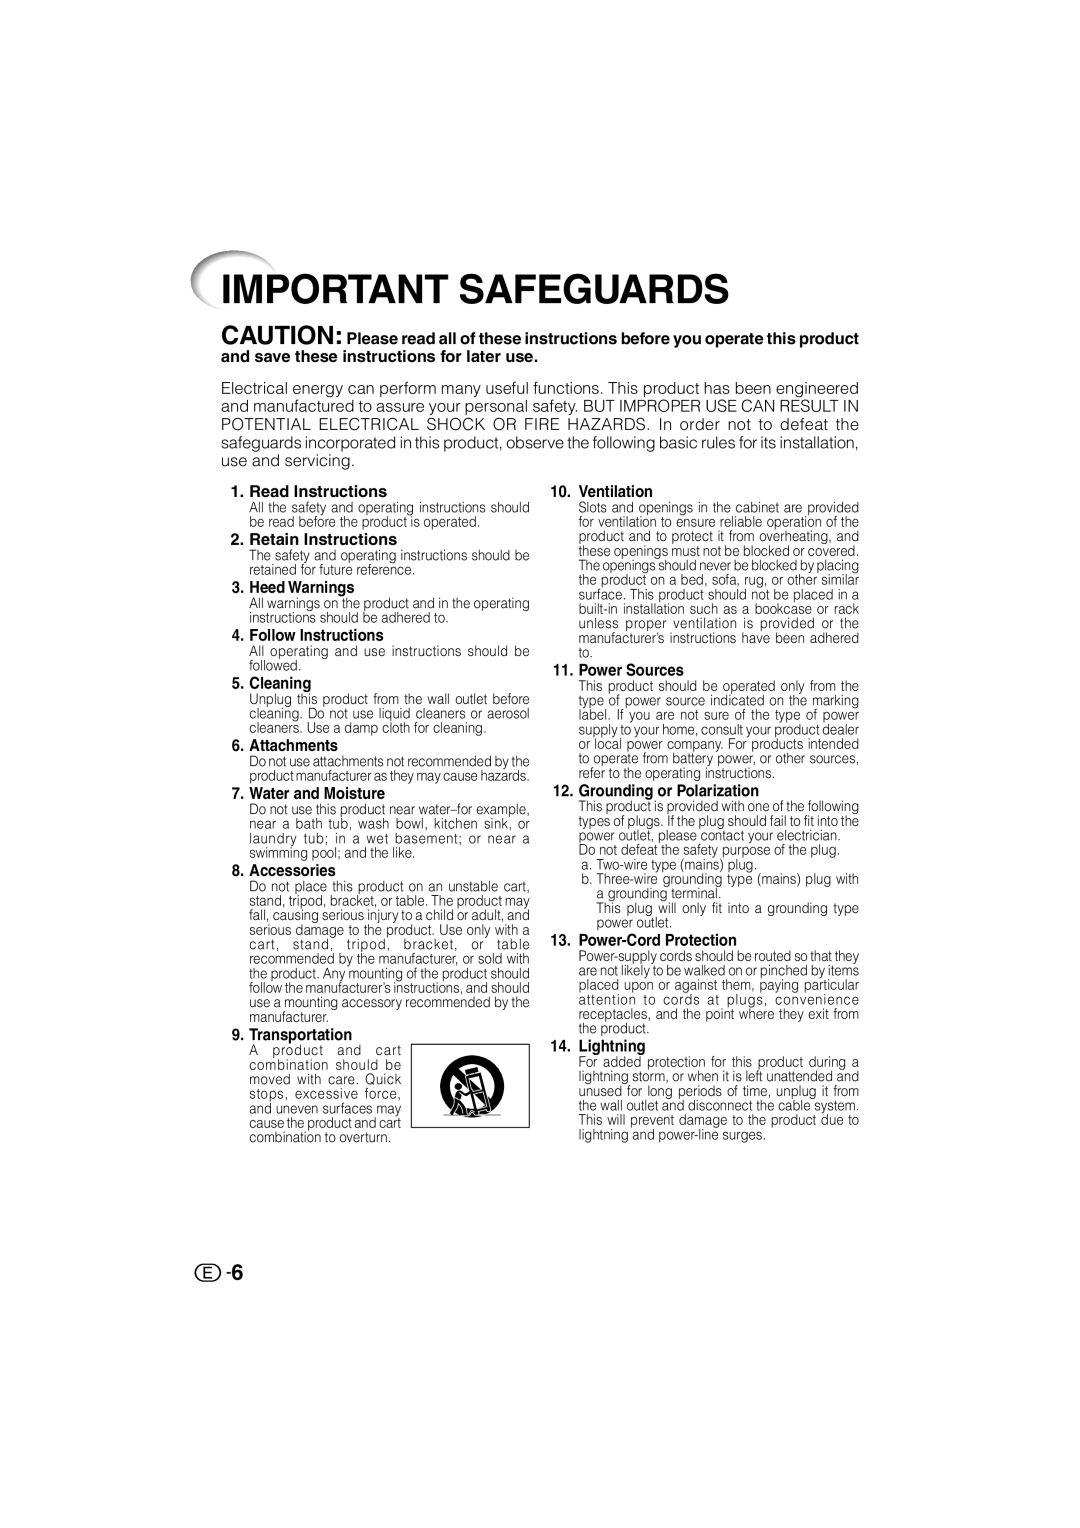 Sharp XV-Z3000U Important Safeguards, Read Instructions, Retain Instructions, Heed Warnings, Follow Instructions, Cleaning 